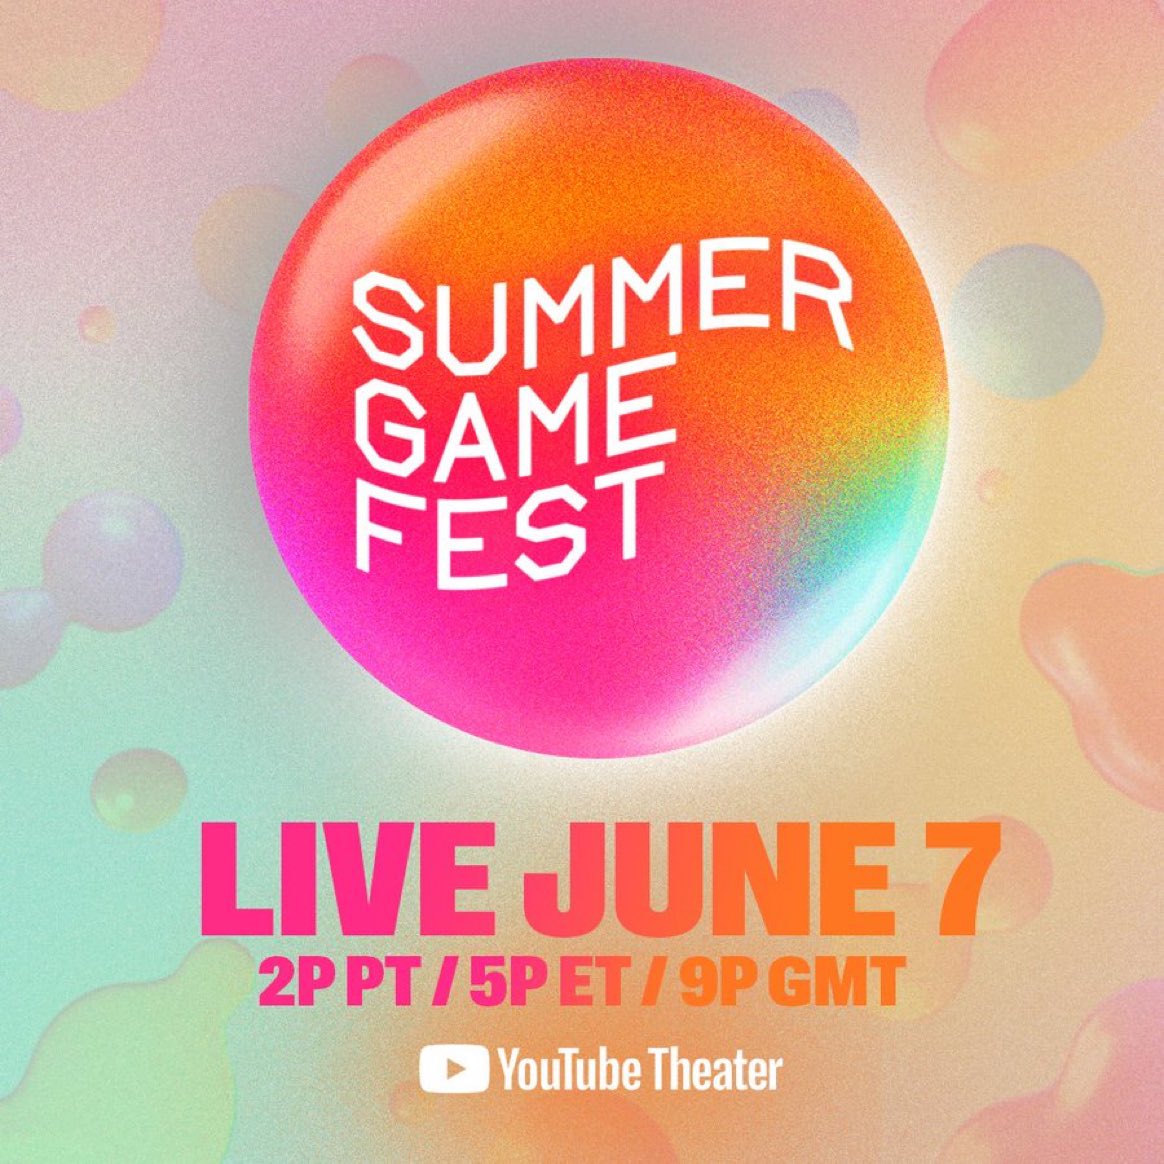 Friday, June 7 @SummerGameFest streams live from @youtubetheater in LA at 2p PT / 5p ET / 9p GMT.

A two hour showcase of what's next in gaming.

Sign up now at summergamefest.com for event alerts. 

#SummerGameFest #SGF24 #SGF2024